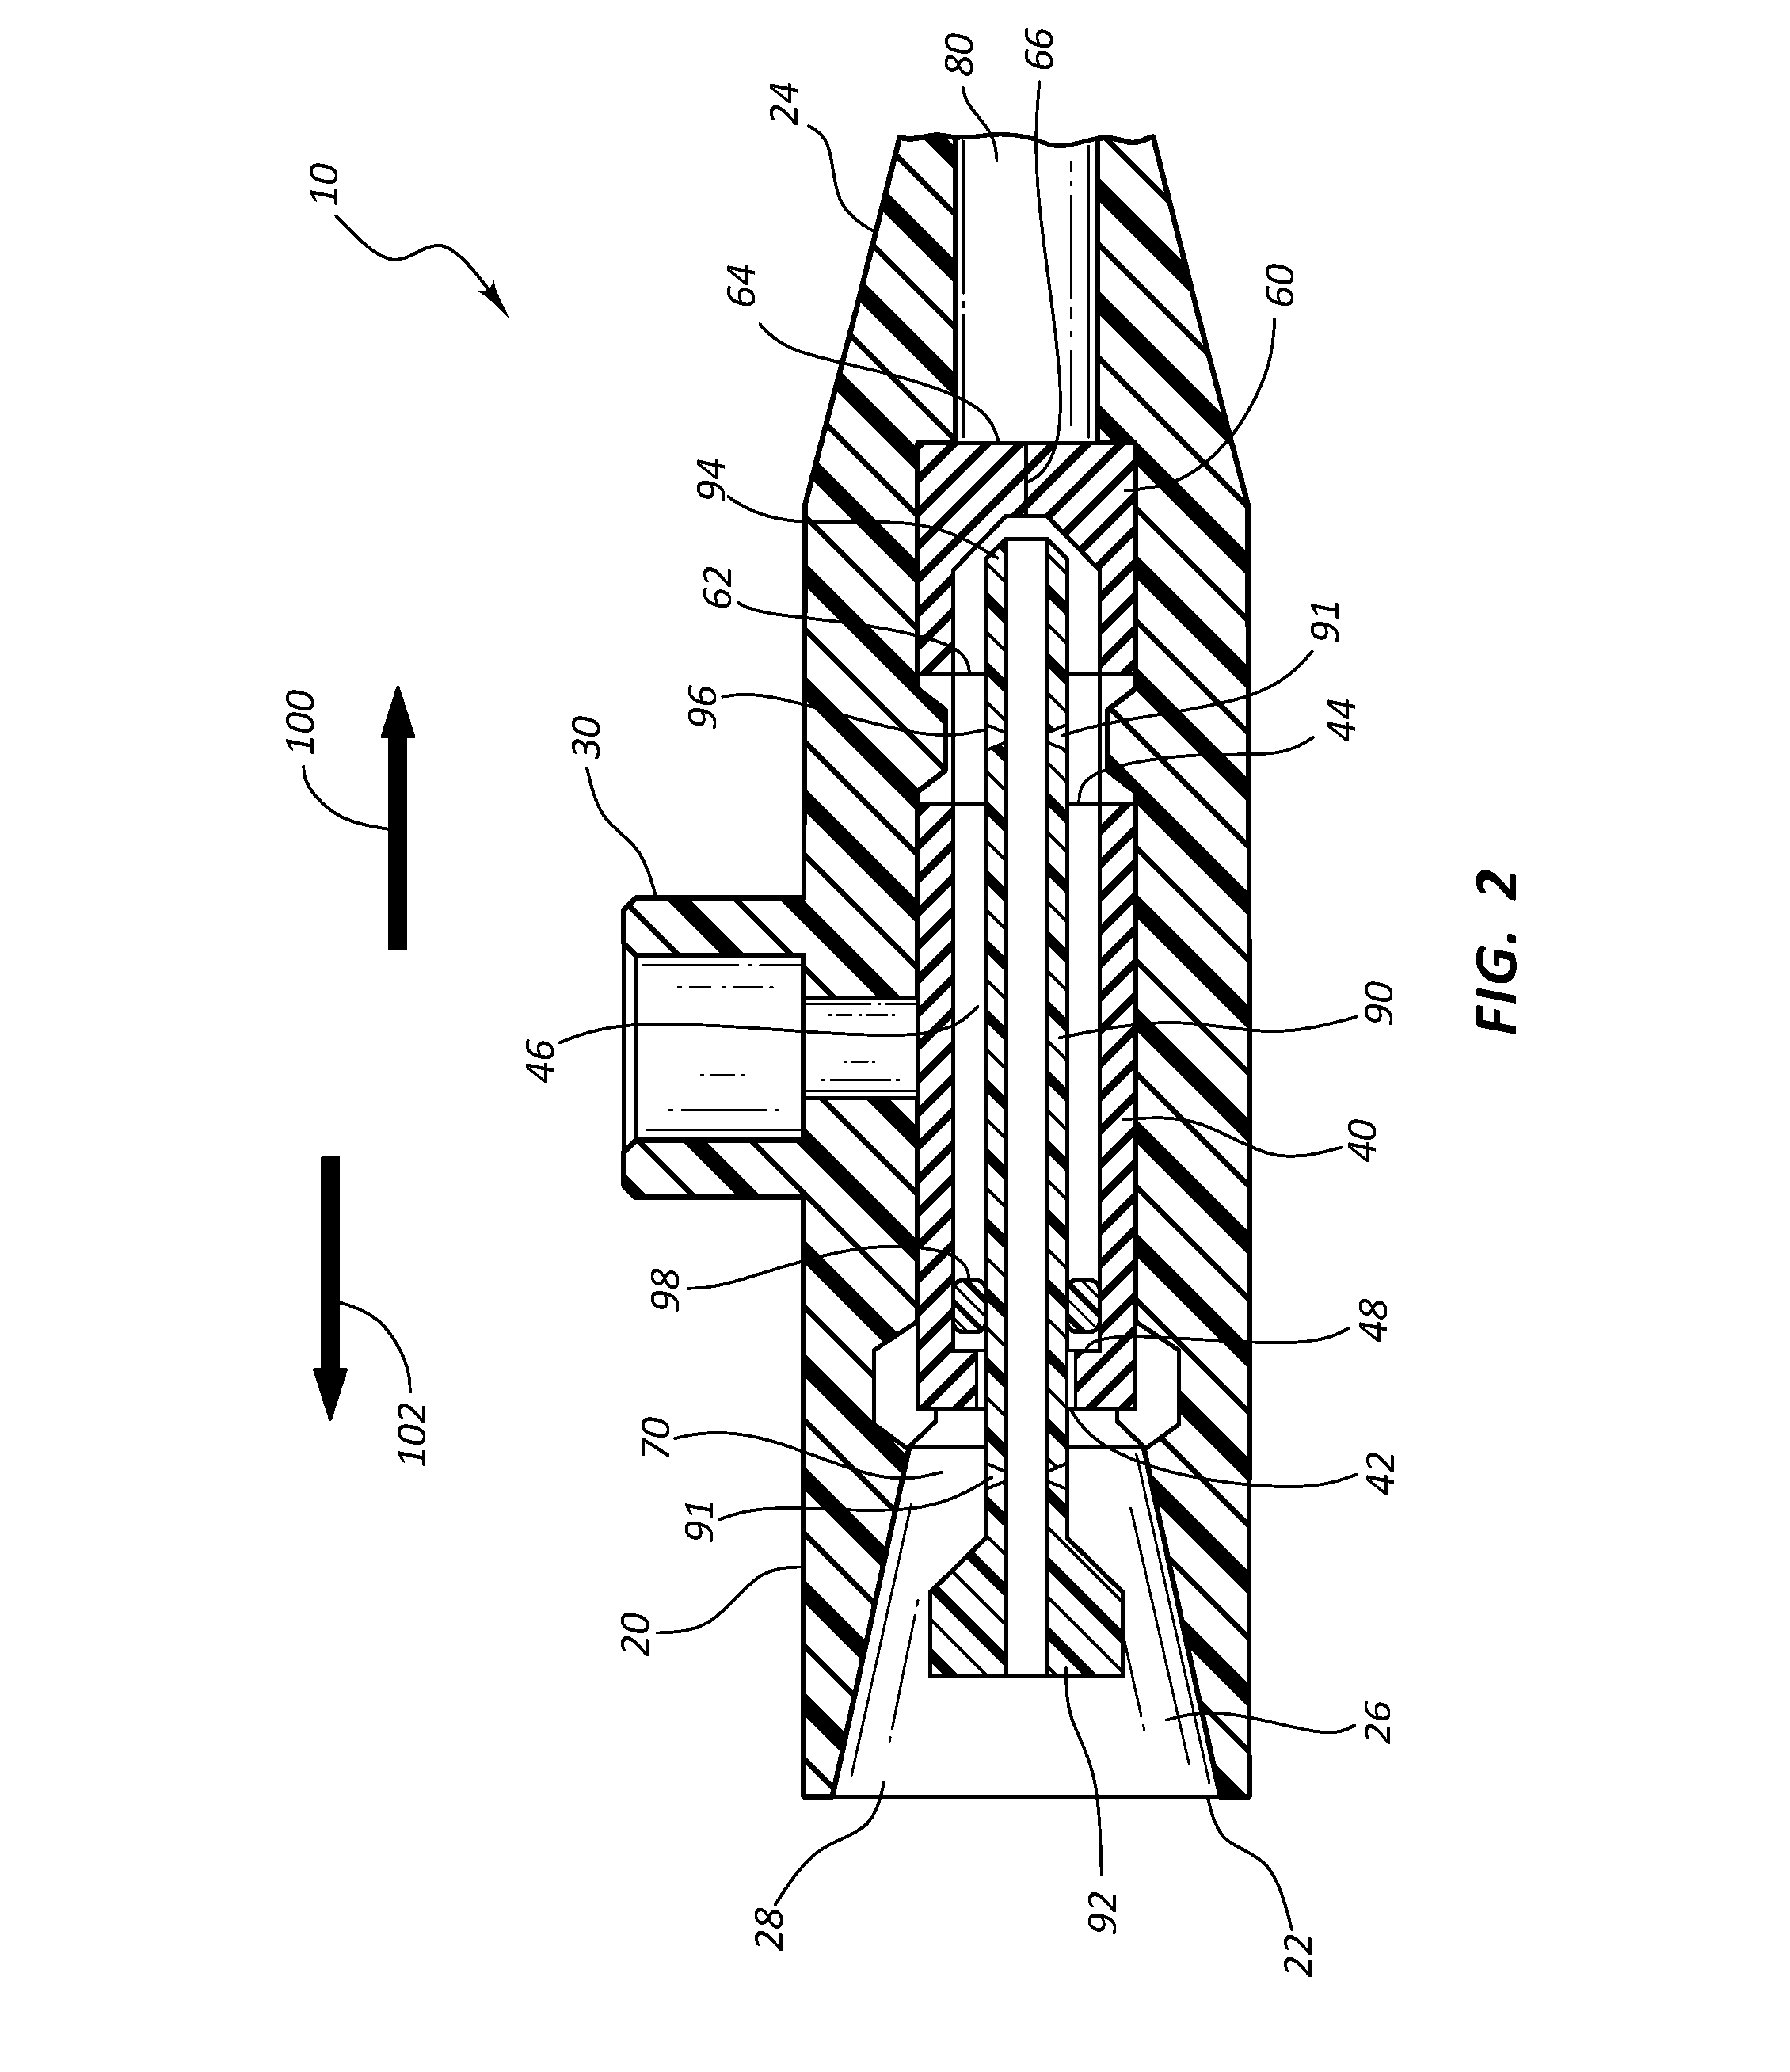 Ported catheter adapter with integrated septum actuator retention